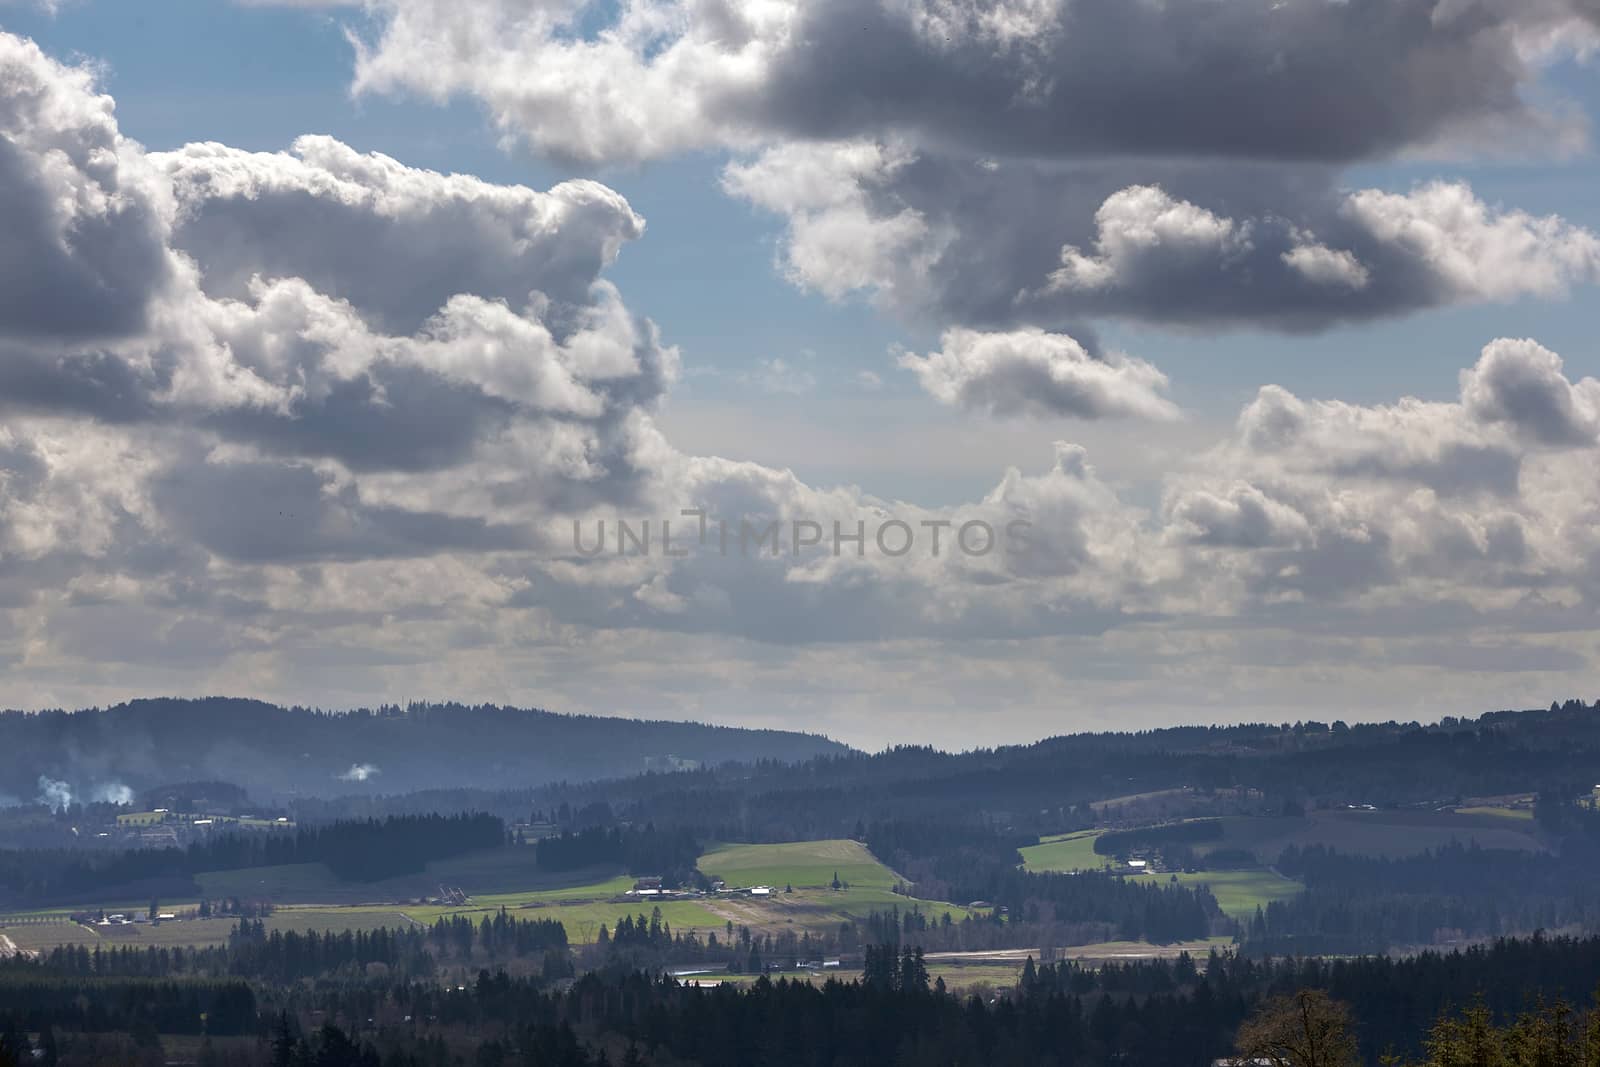 View of Chehalem Mountains and Tualatin River Valley in Beaverton Oregon